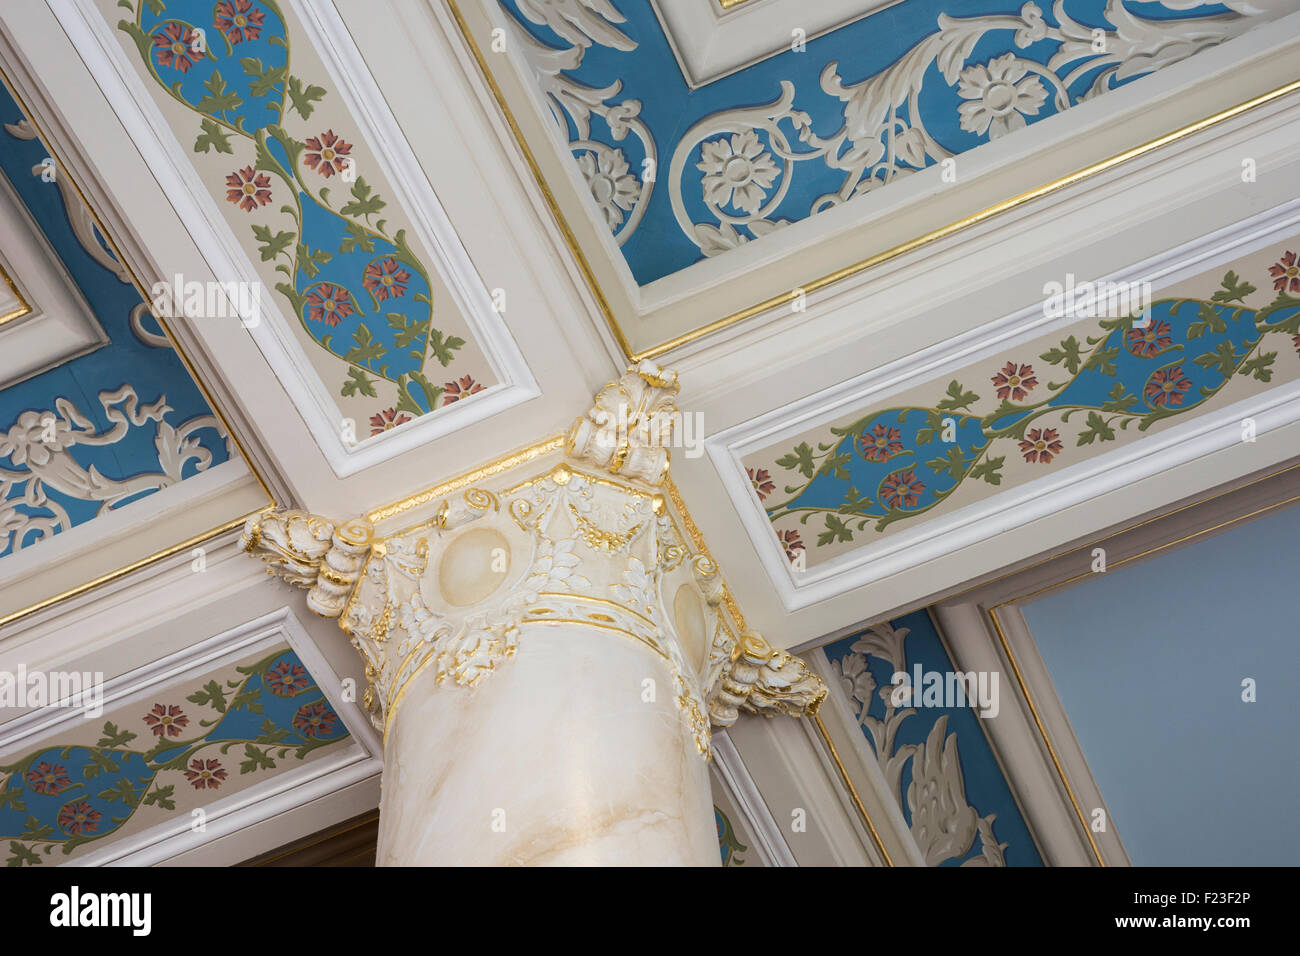 Architectural detail of the gold plated and painted ceiling at the French Lick Hotel Resort, French Lick, IN, USA Stock Photo